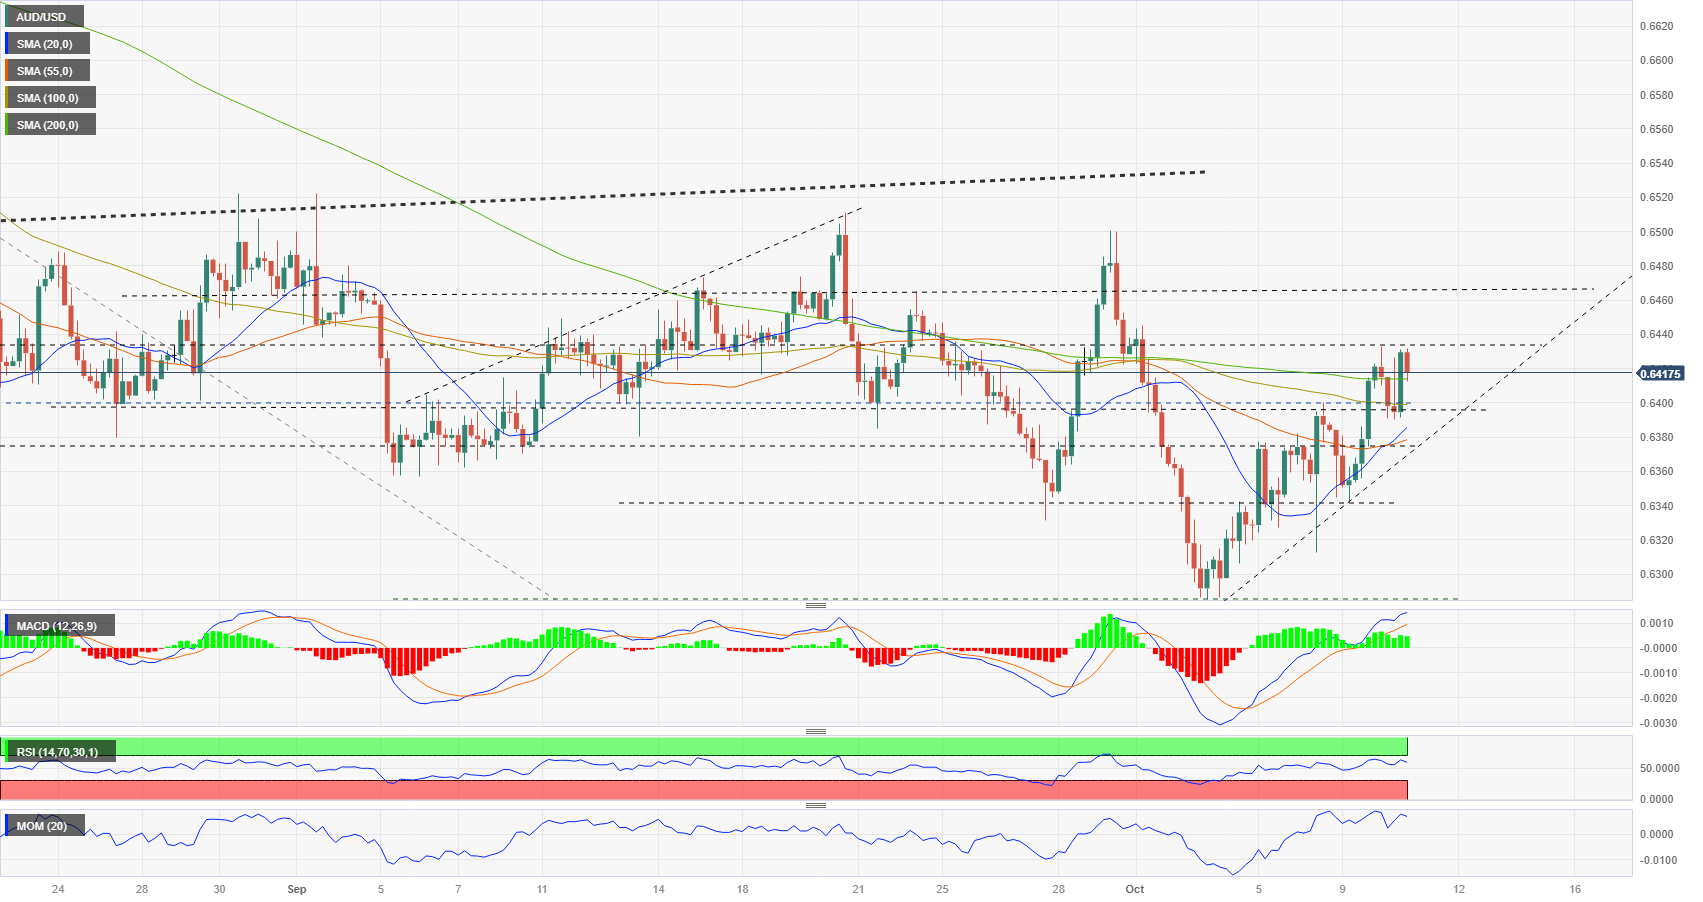 AUD/USD to test 50-Day SMA on break above monthly opening range